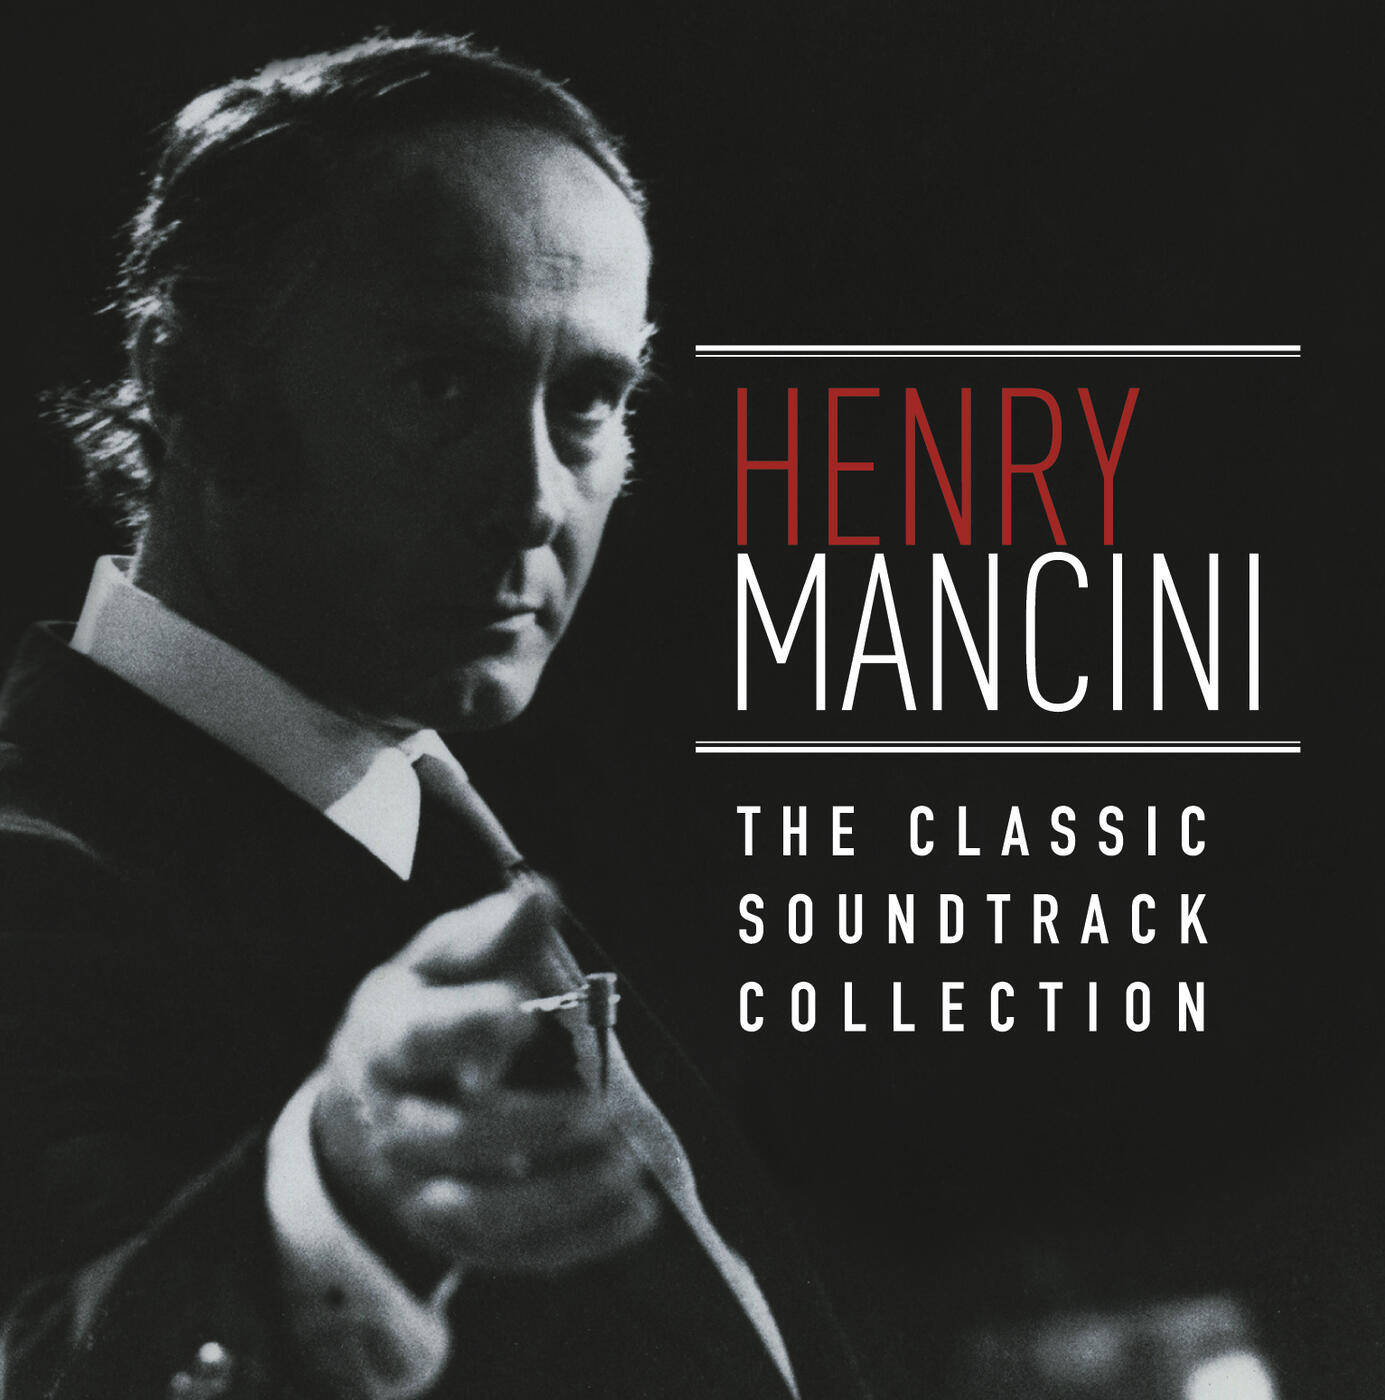 Legendary Composer Henry Mancini's Classic Soundtrack Collection Wallpaper